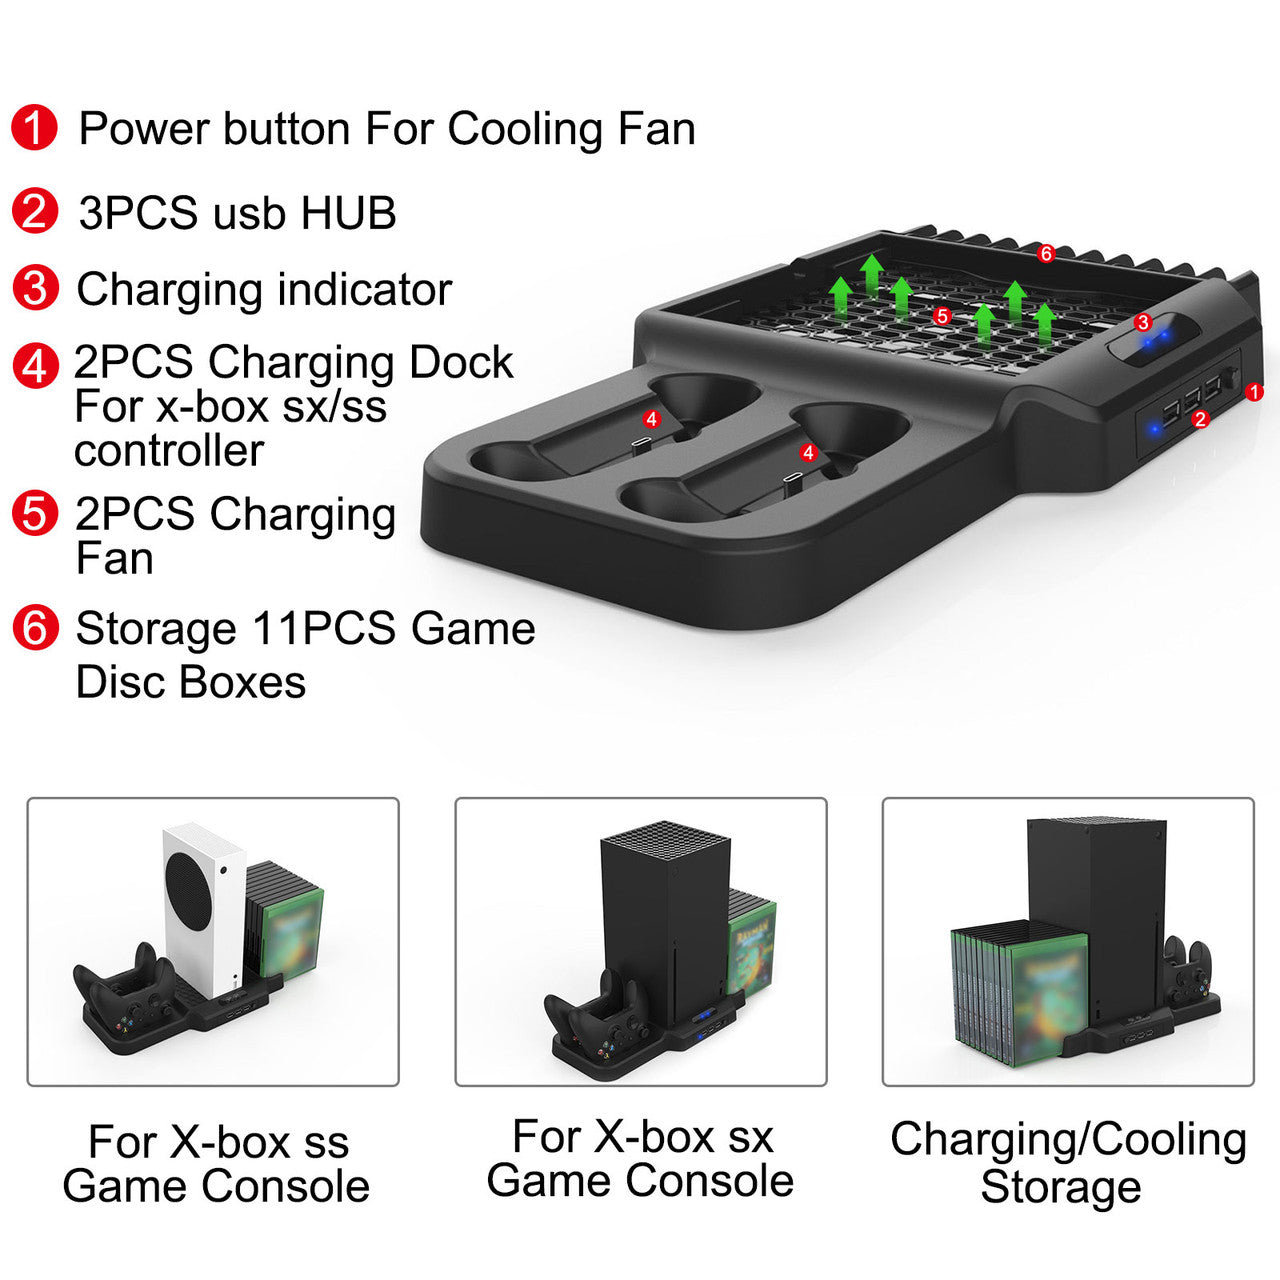 Vertical Charging Stand for Xbox Series X, Cooling Vertical Dock Stand fit for Xbox Series X - Charger Dock for Xbox Series X Controllers with Dual Cooling Fan and 3 USB Hubs